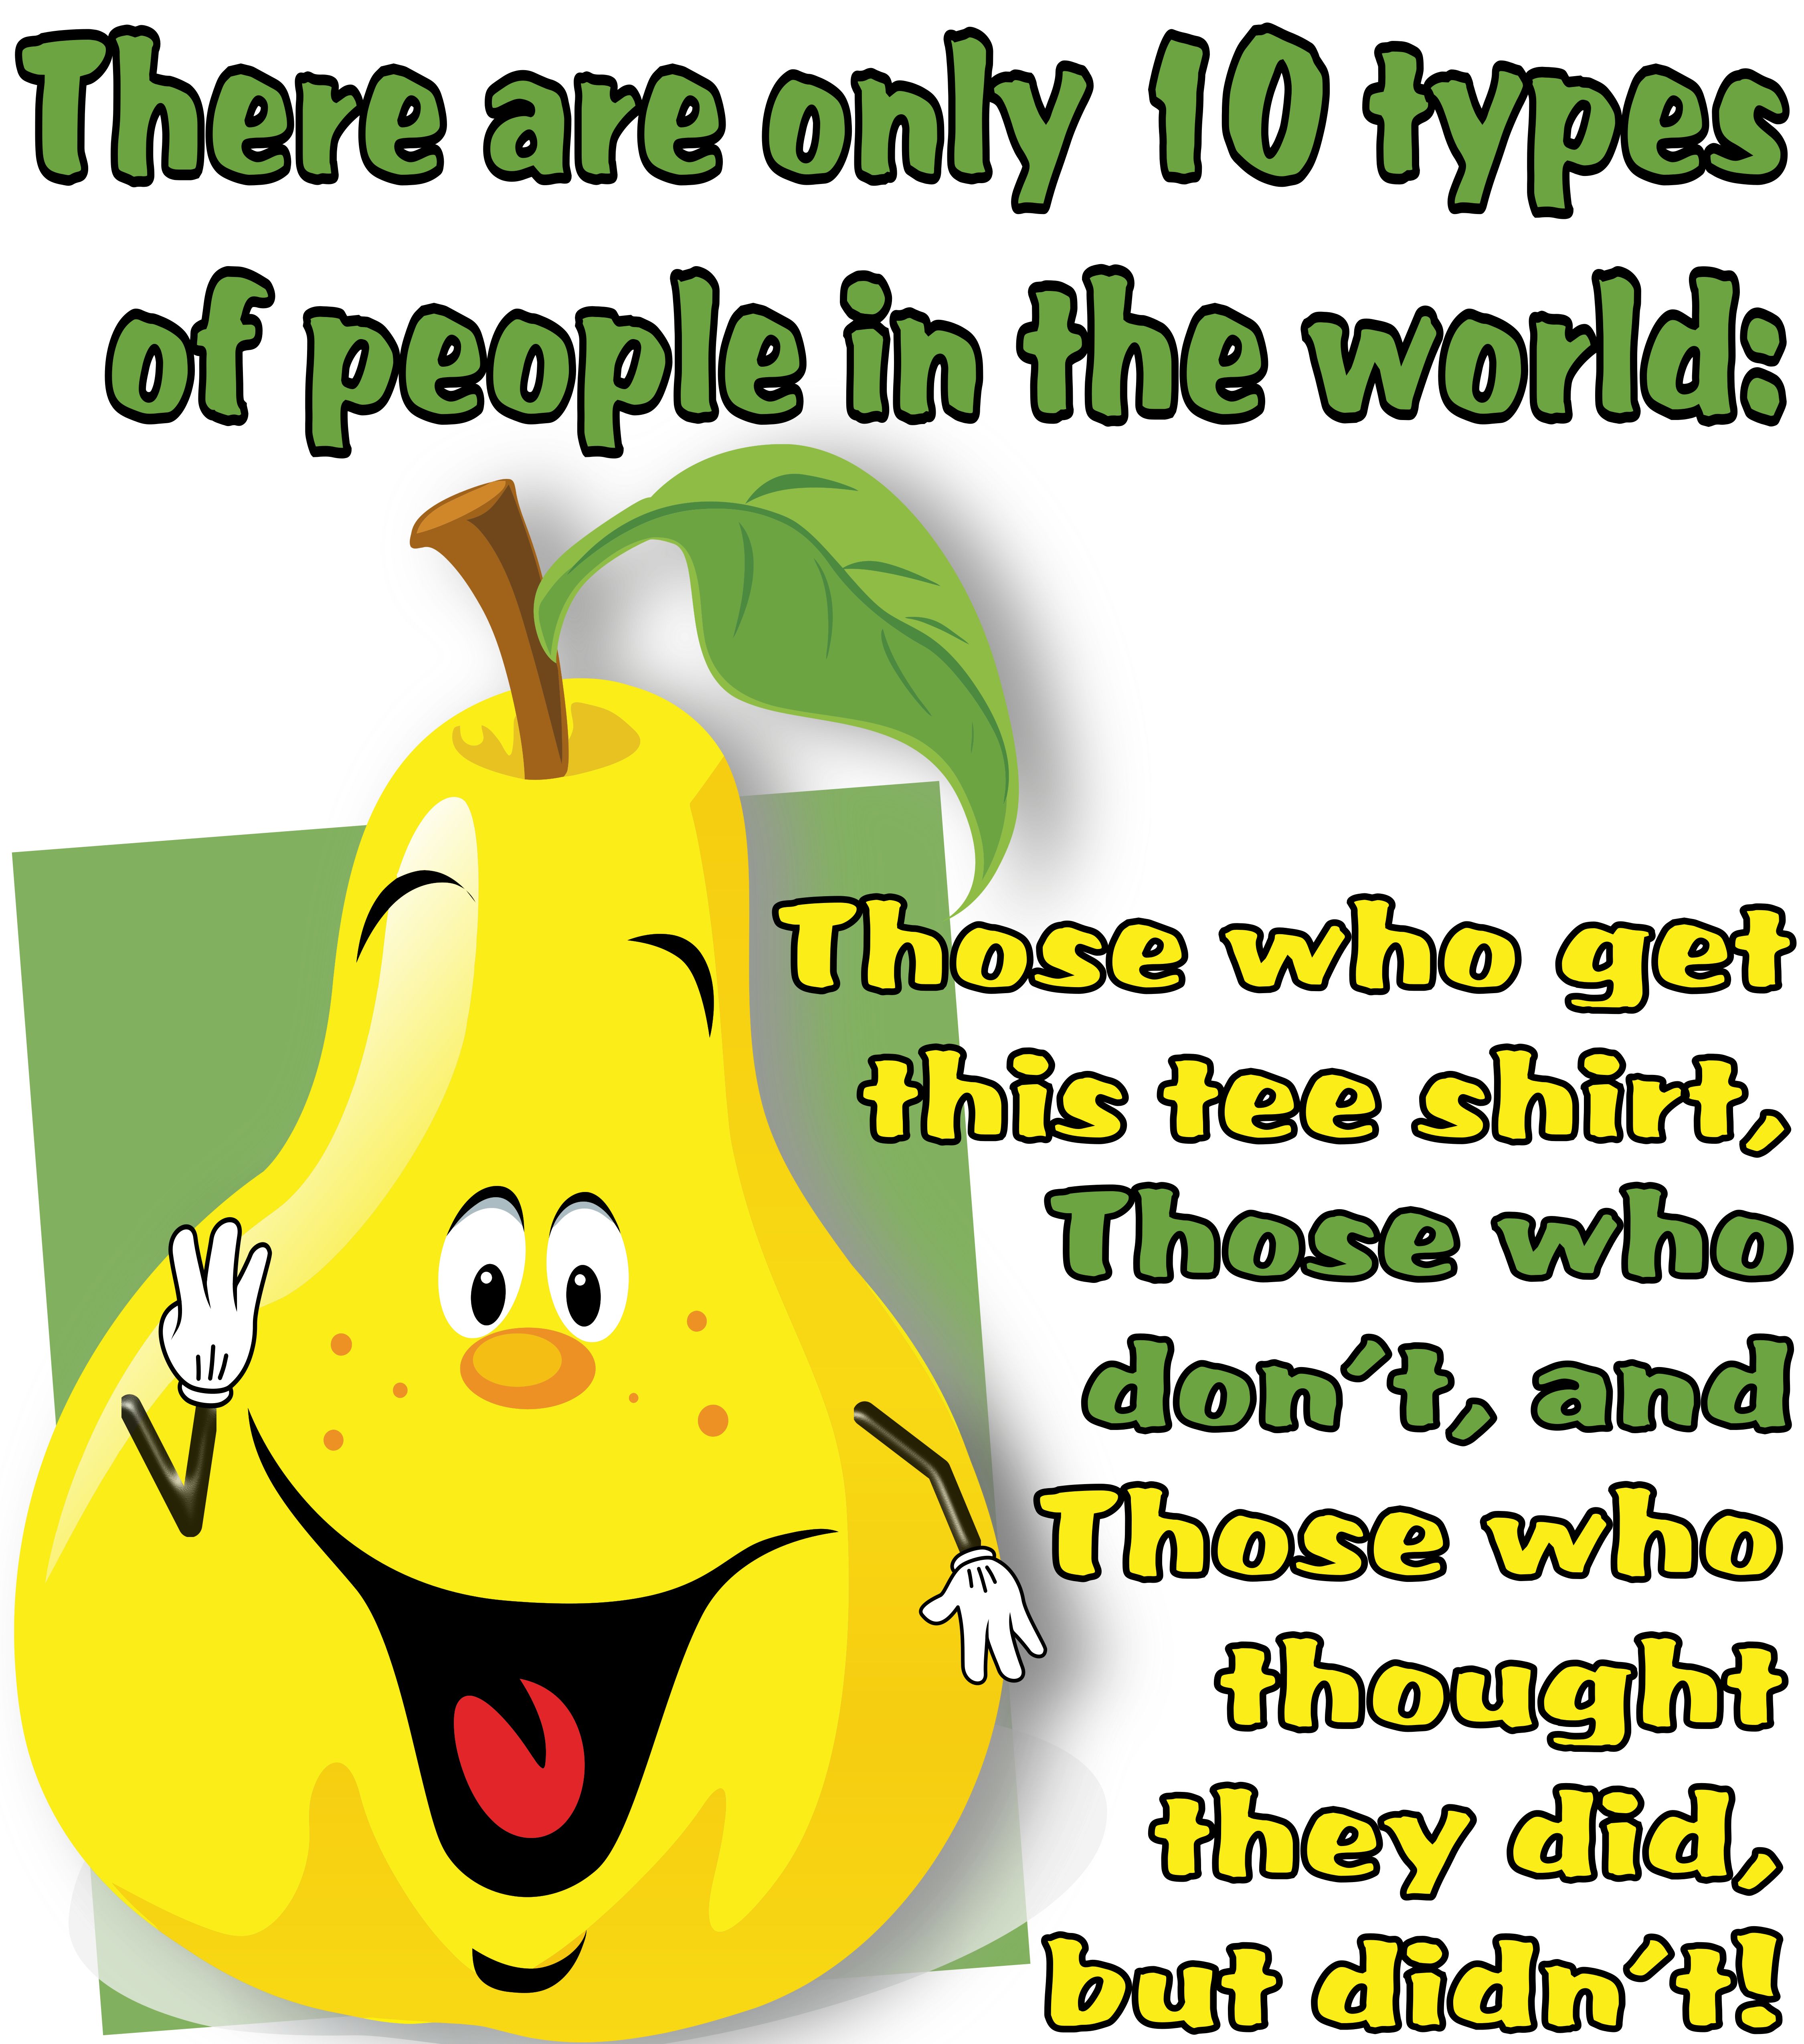 10-types-of-people-1-15x17